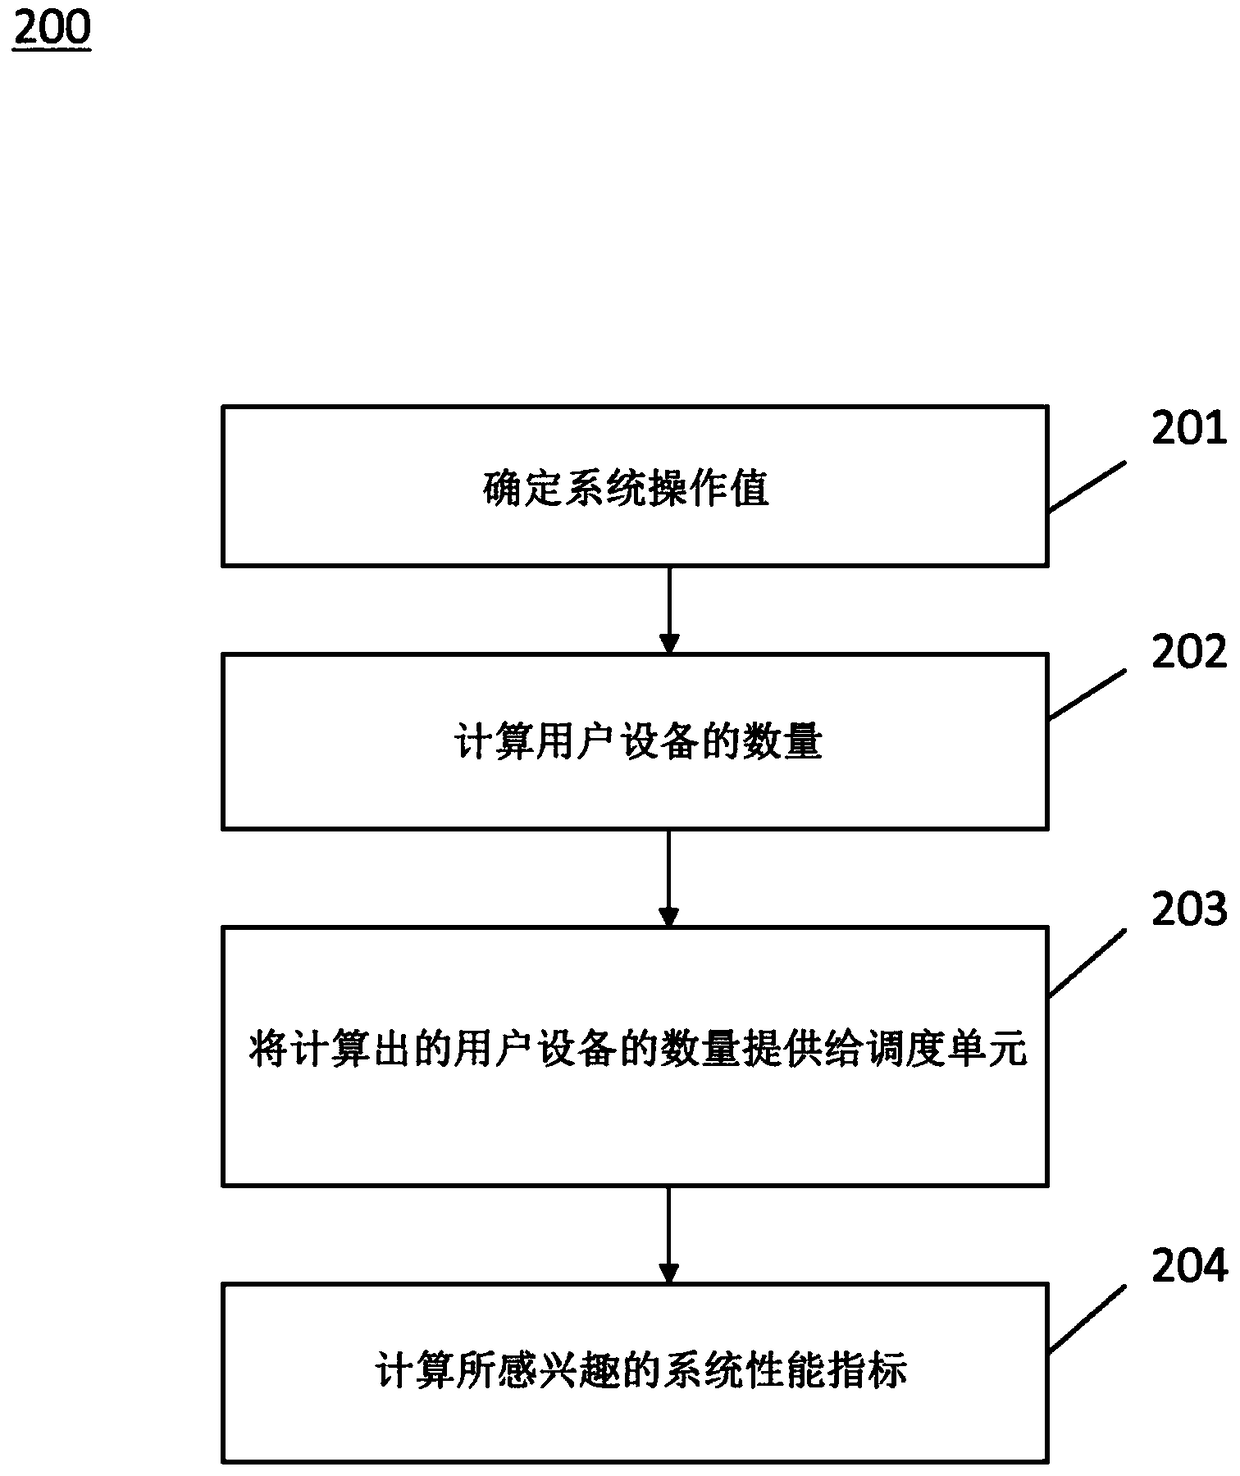 Method and apparatus for enhancing user selection in a mu-mimo system